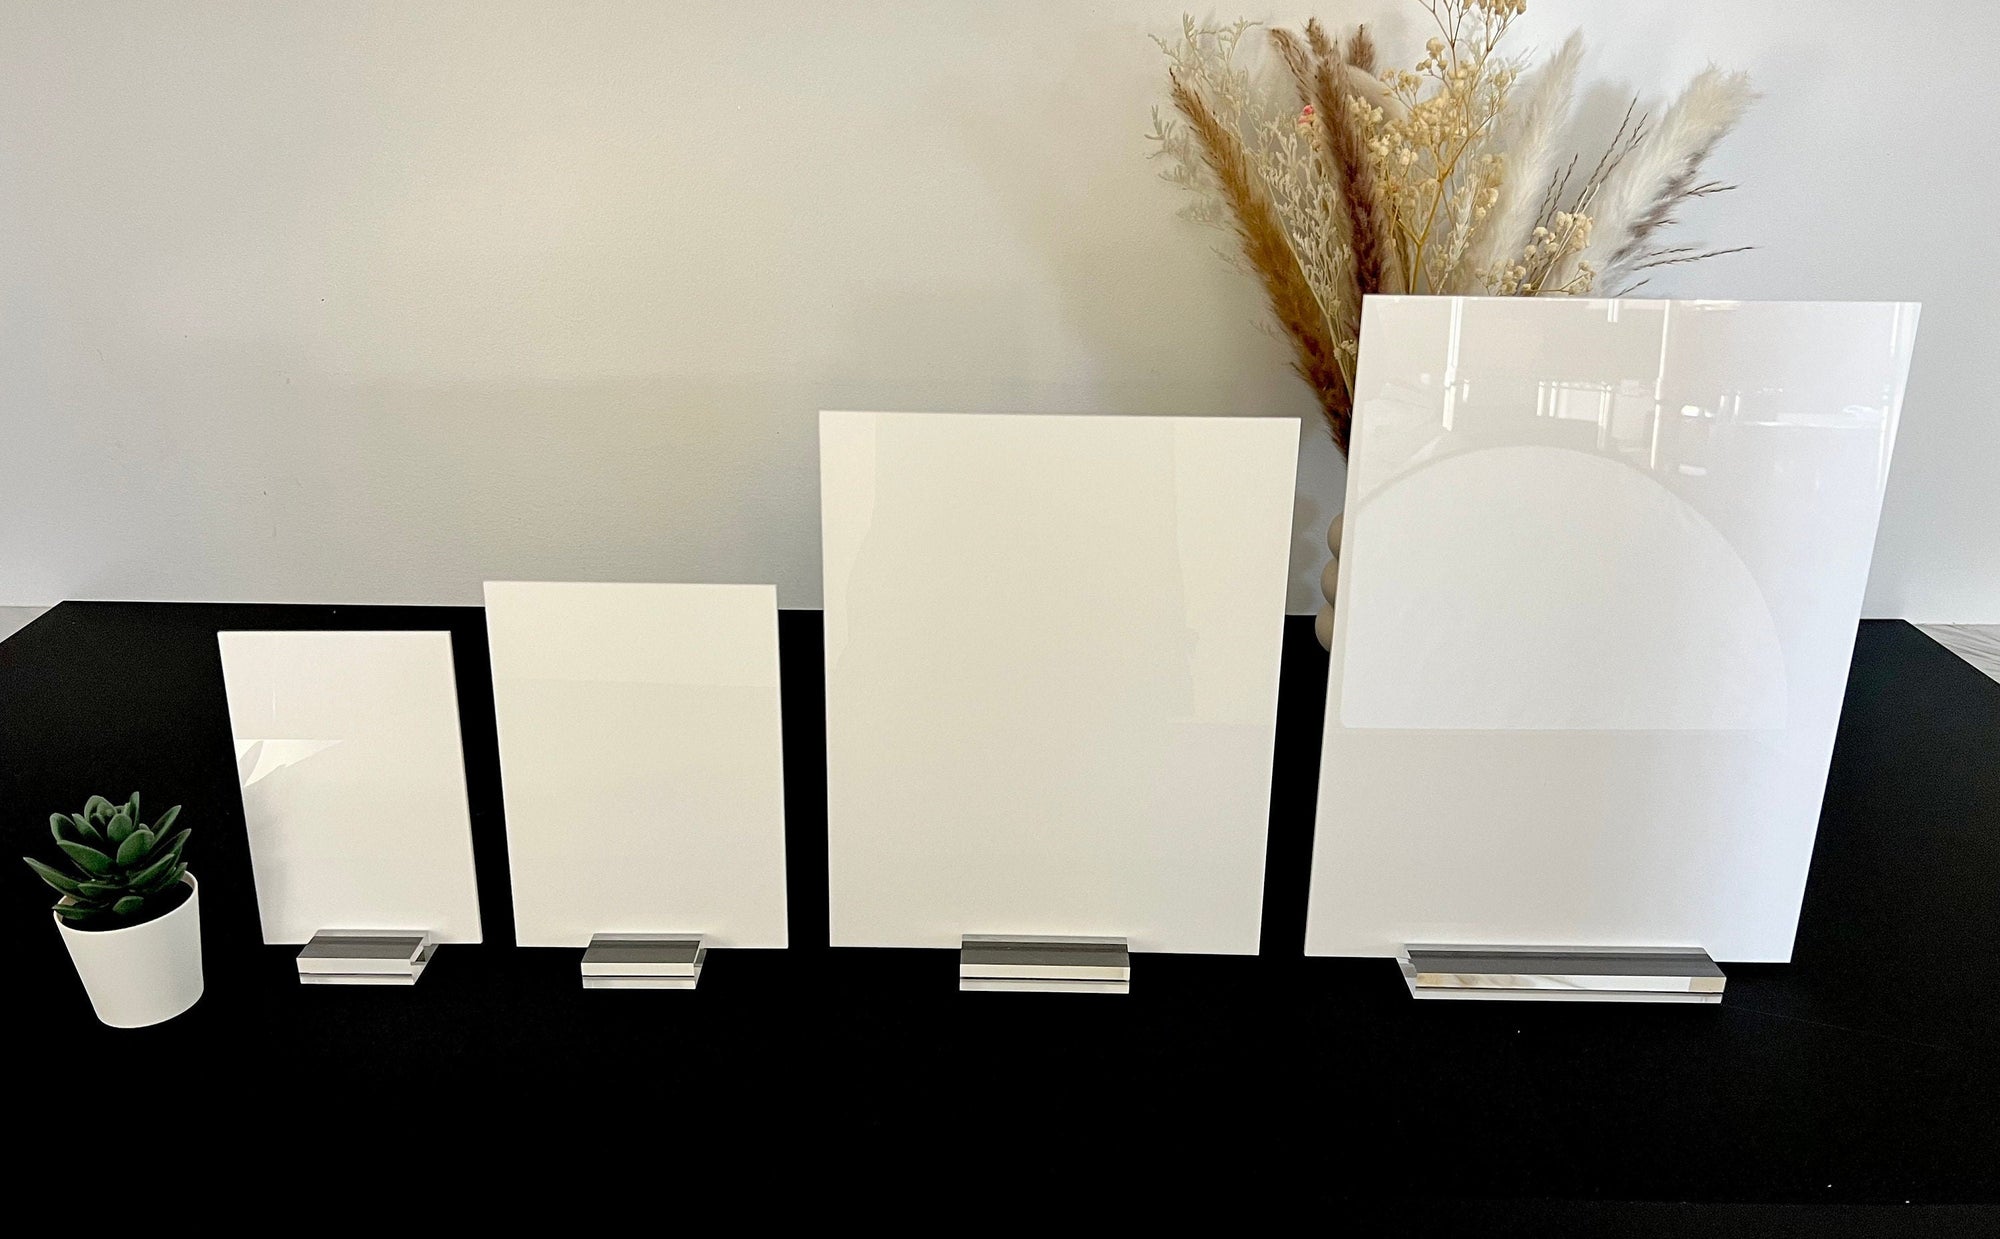 Clear, Frosted, White and Black Acrylic Blank Stock Sheet Lucite Wedding Signs | DIY Perspex Blanks | Wholesale Craft Supply